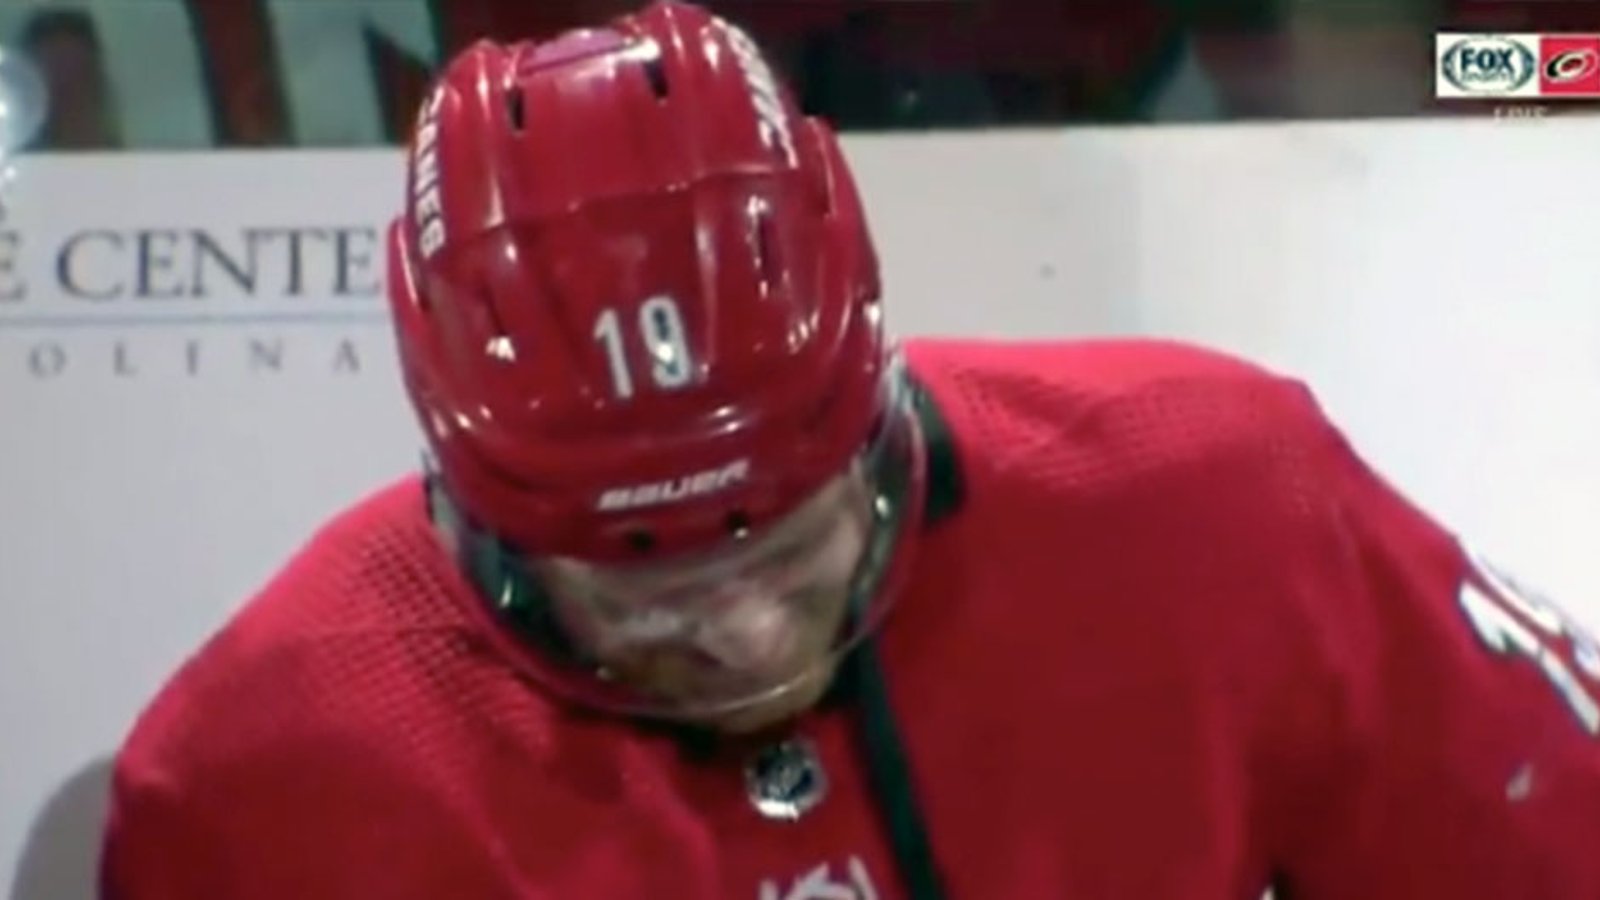 Dougie Hamilton takes a moment to compose himself as Hurricanes fans chant his name